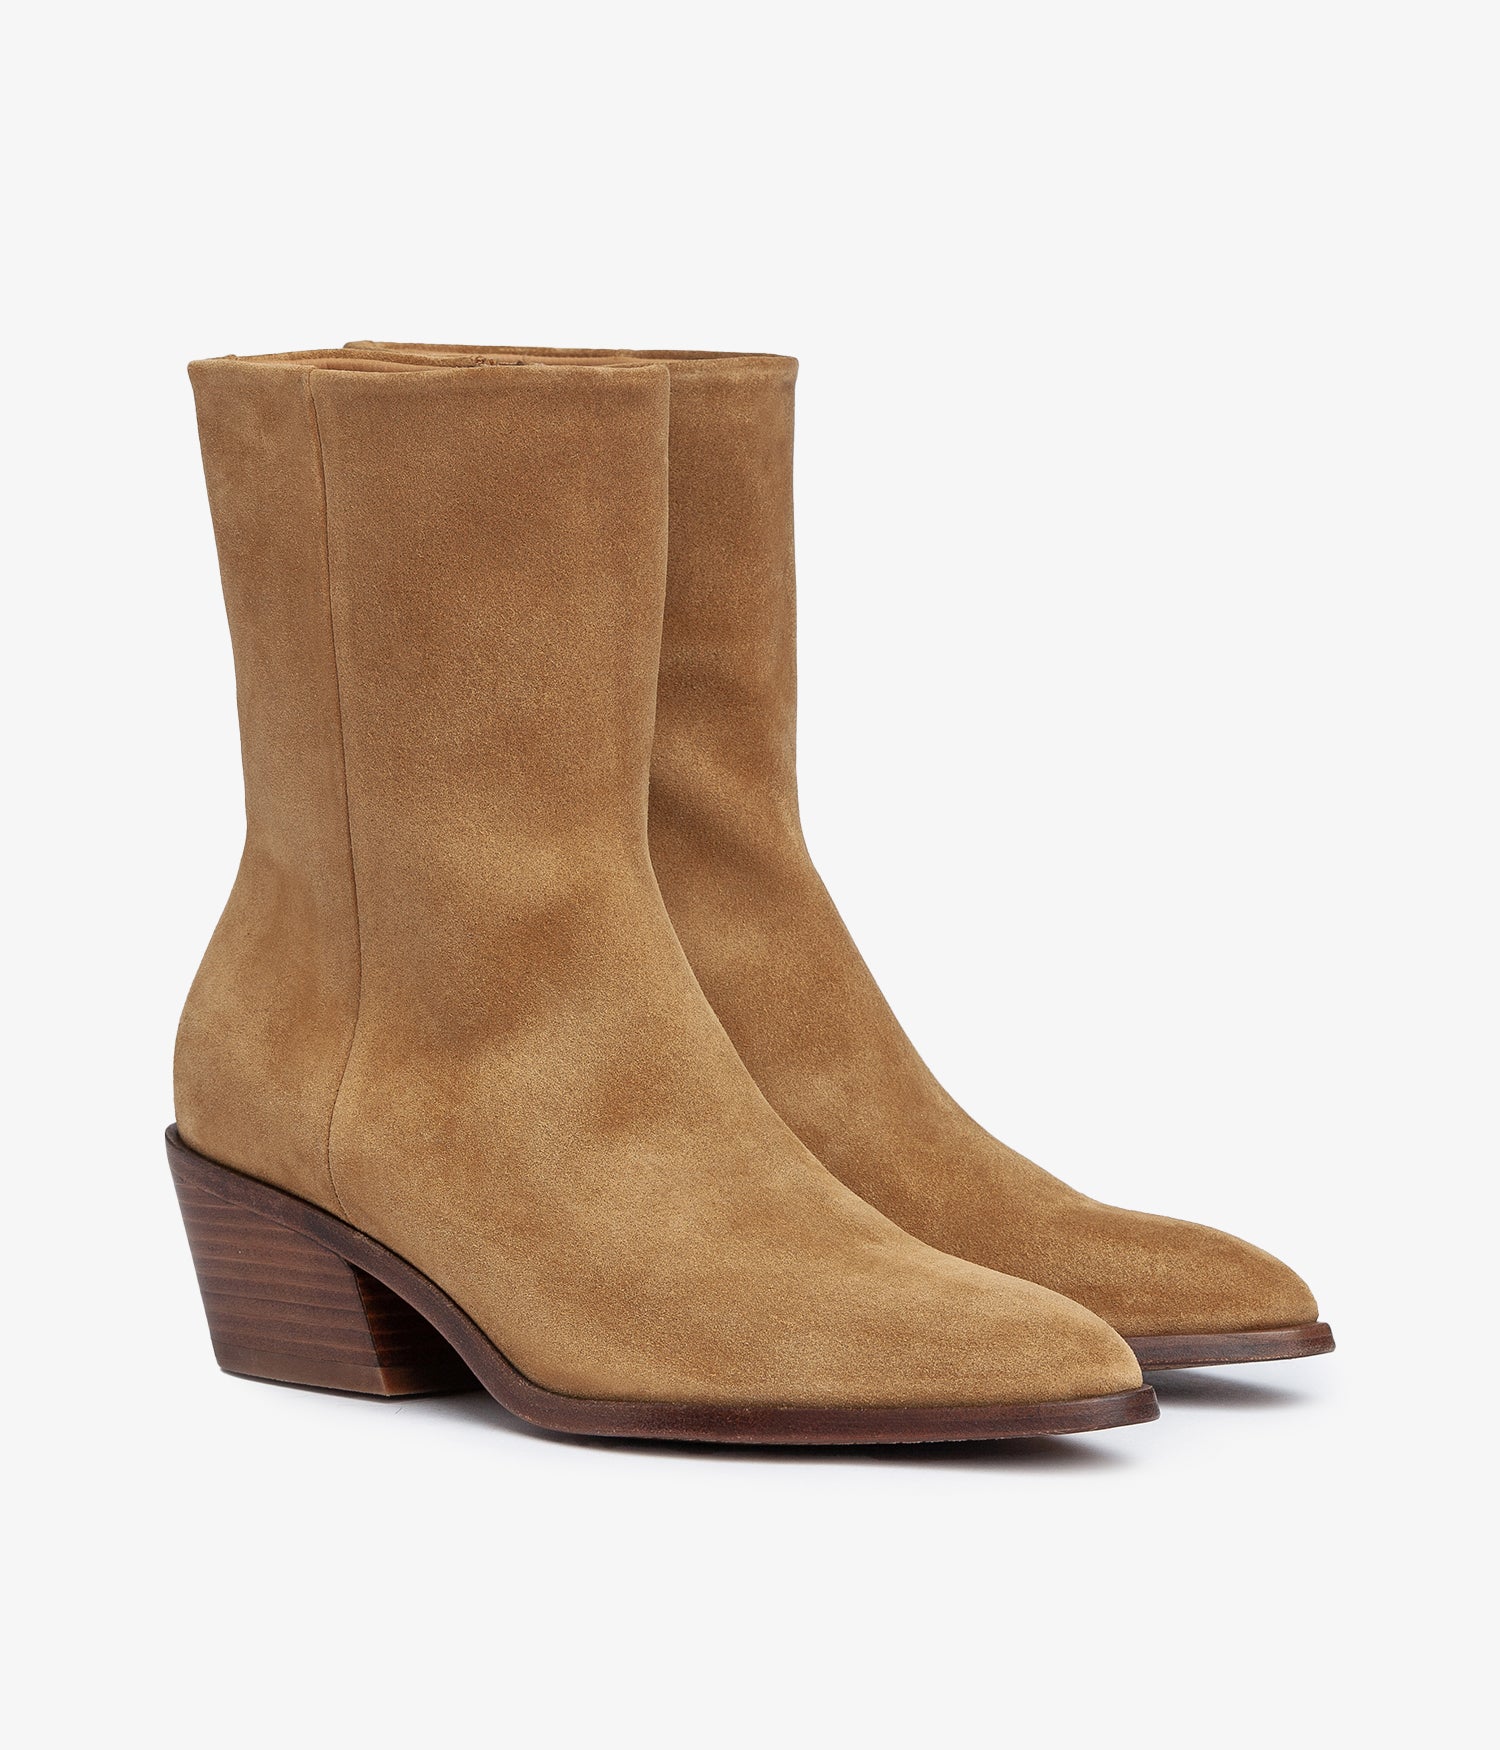 pedro garcia western brown suede boot atena aw23 1